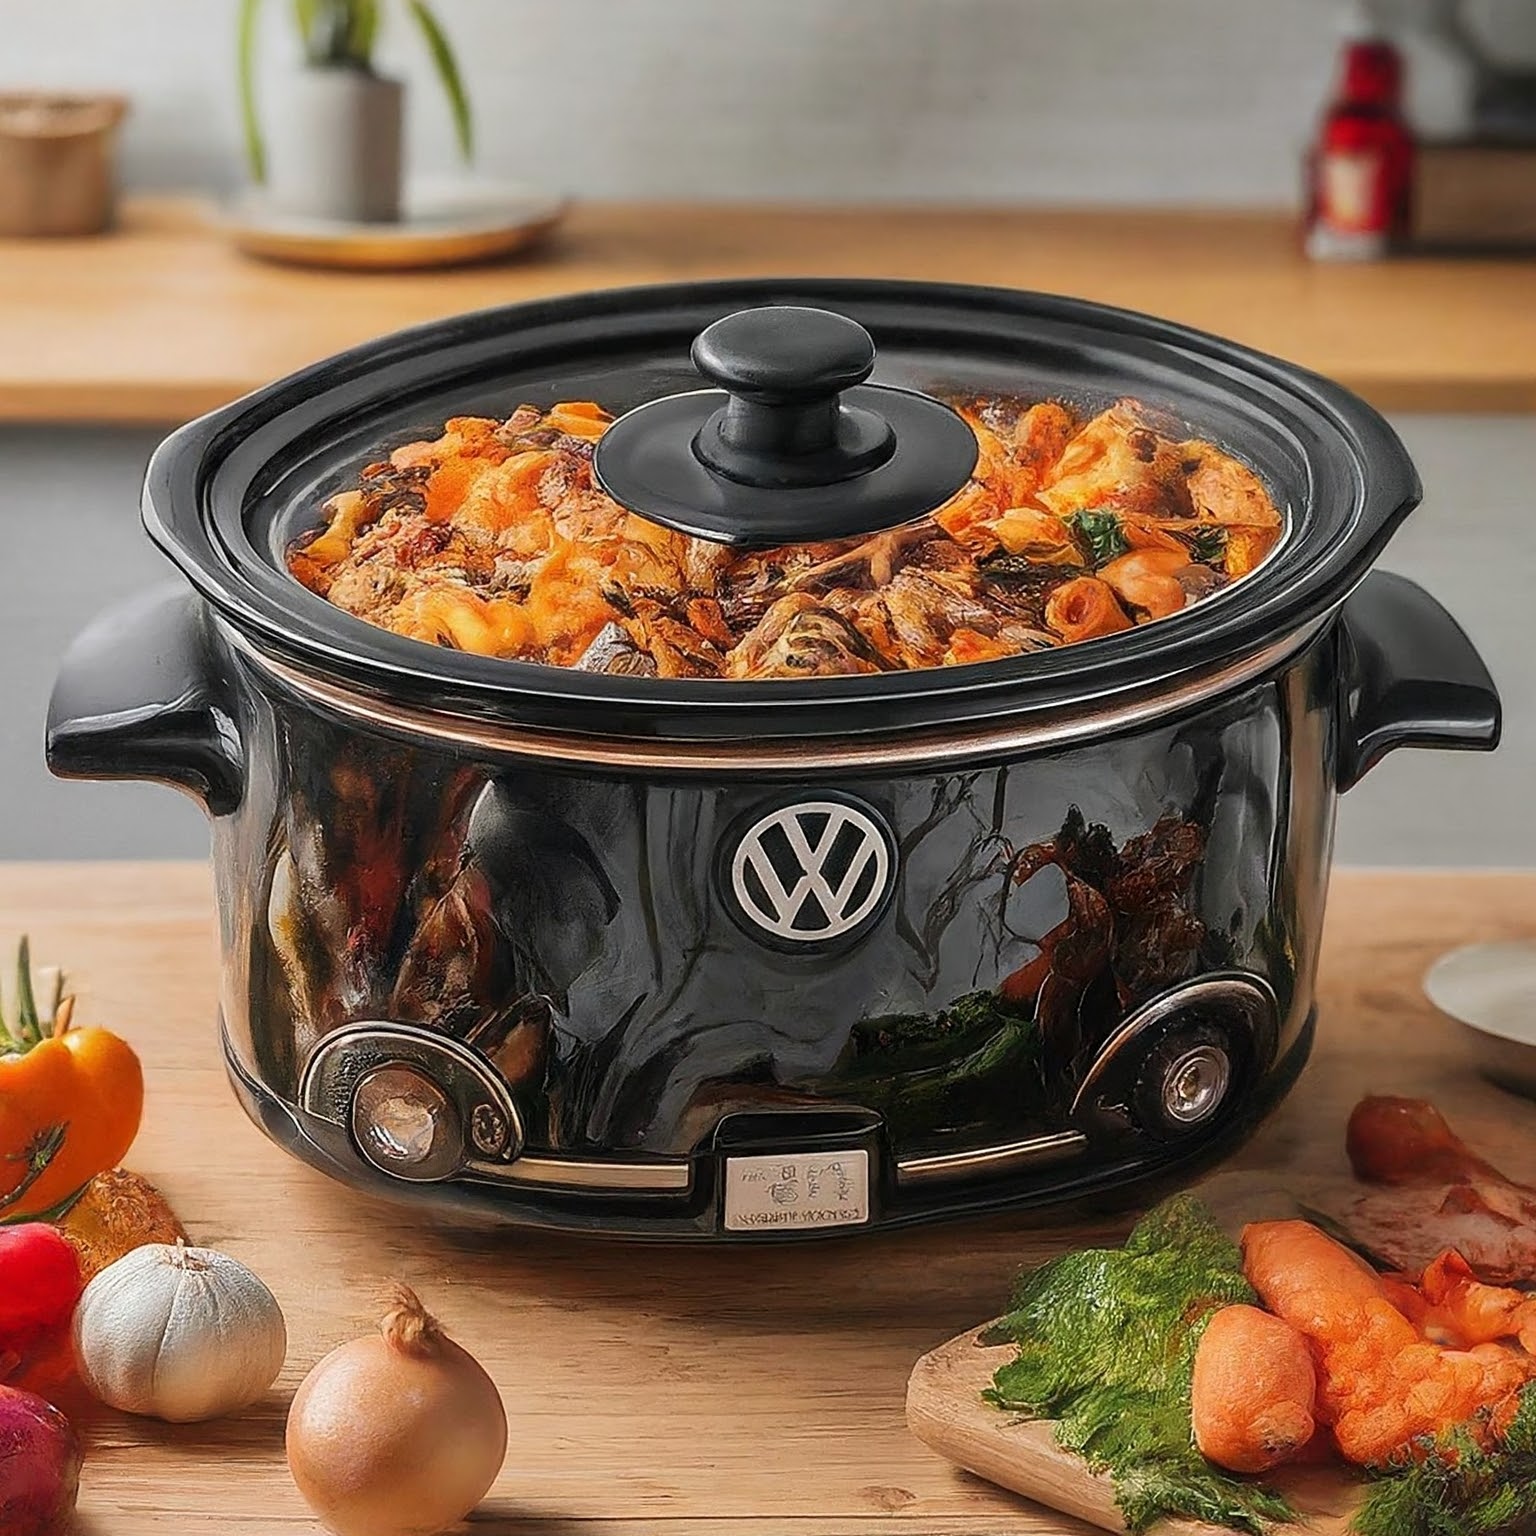 Volkswagen Bus Shaped Slow Cookers: Infusing Retro Vibes into Your Kitchen Adventure luxarts volkswagen bus slow cookers 16